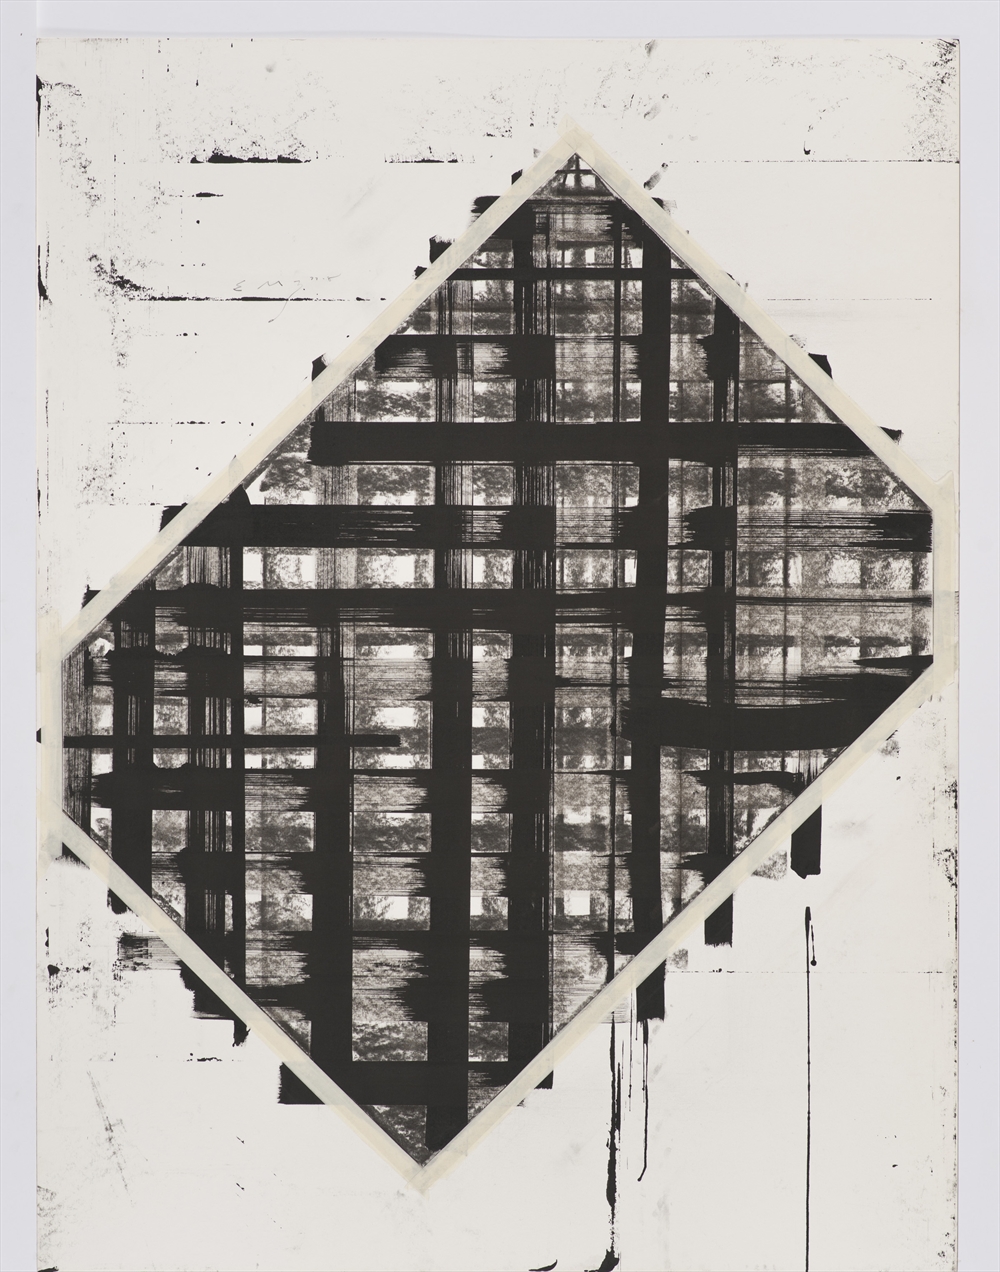 Archisearch - Ed Moses, Cubist Drawing #11, 1977–78, Los Angeles County Museum of Art, promised gift of Ed Moses, (c) 2015 Ed Moses, photo (c) 2015 Museum Associates/LACMA, by Brian Forrest